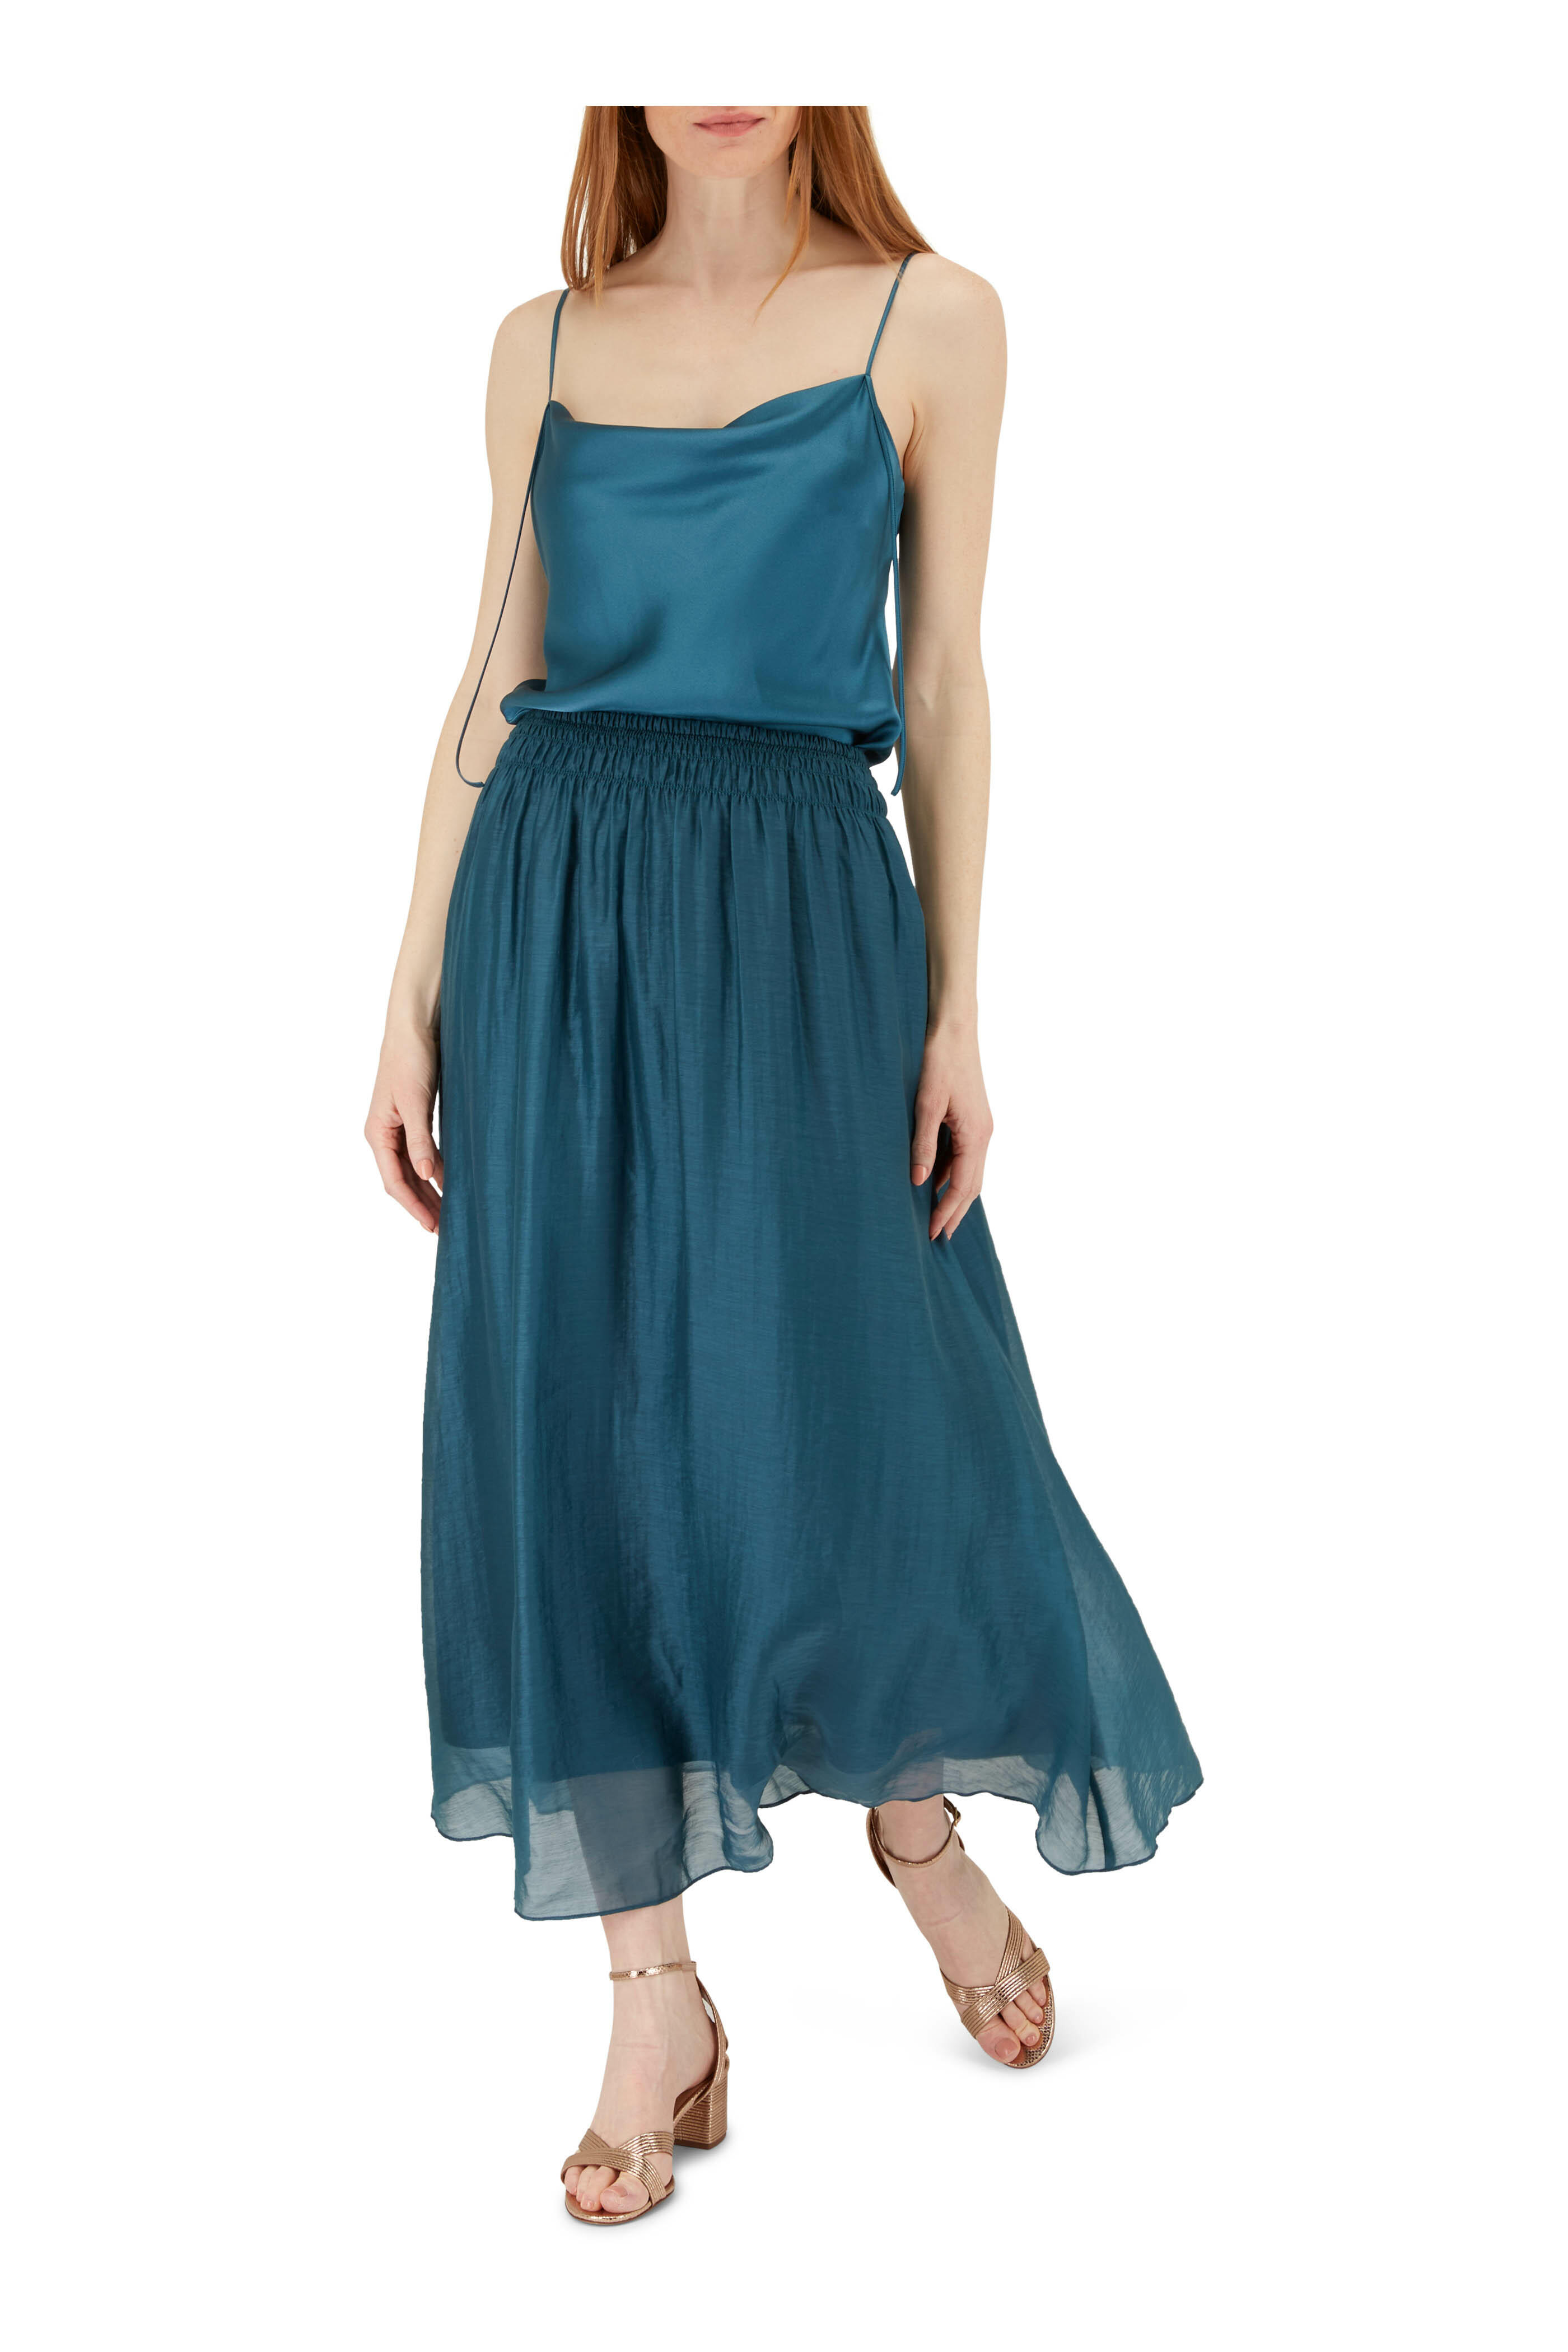 Vince - Blue Waltz Draped Cami | Mitchell Stores